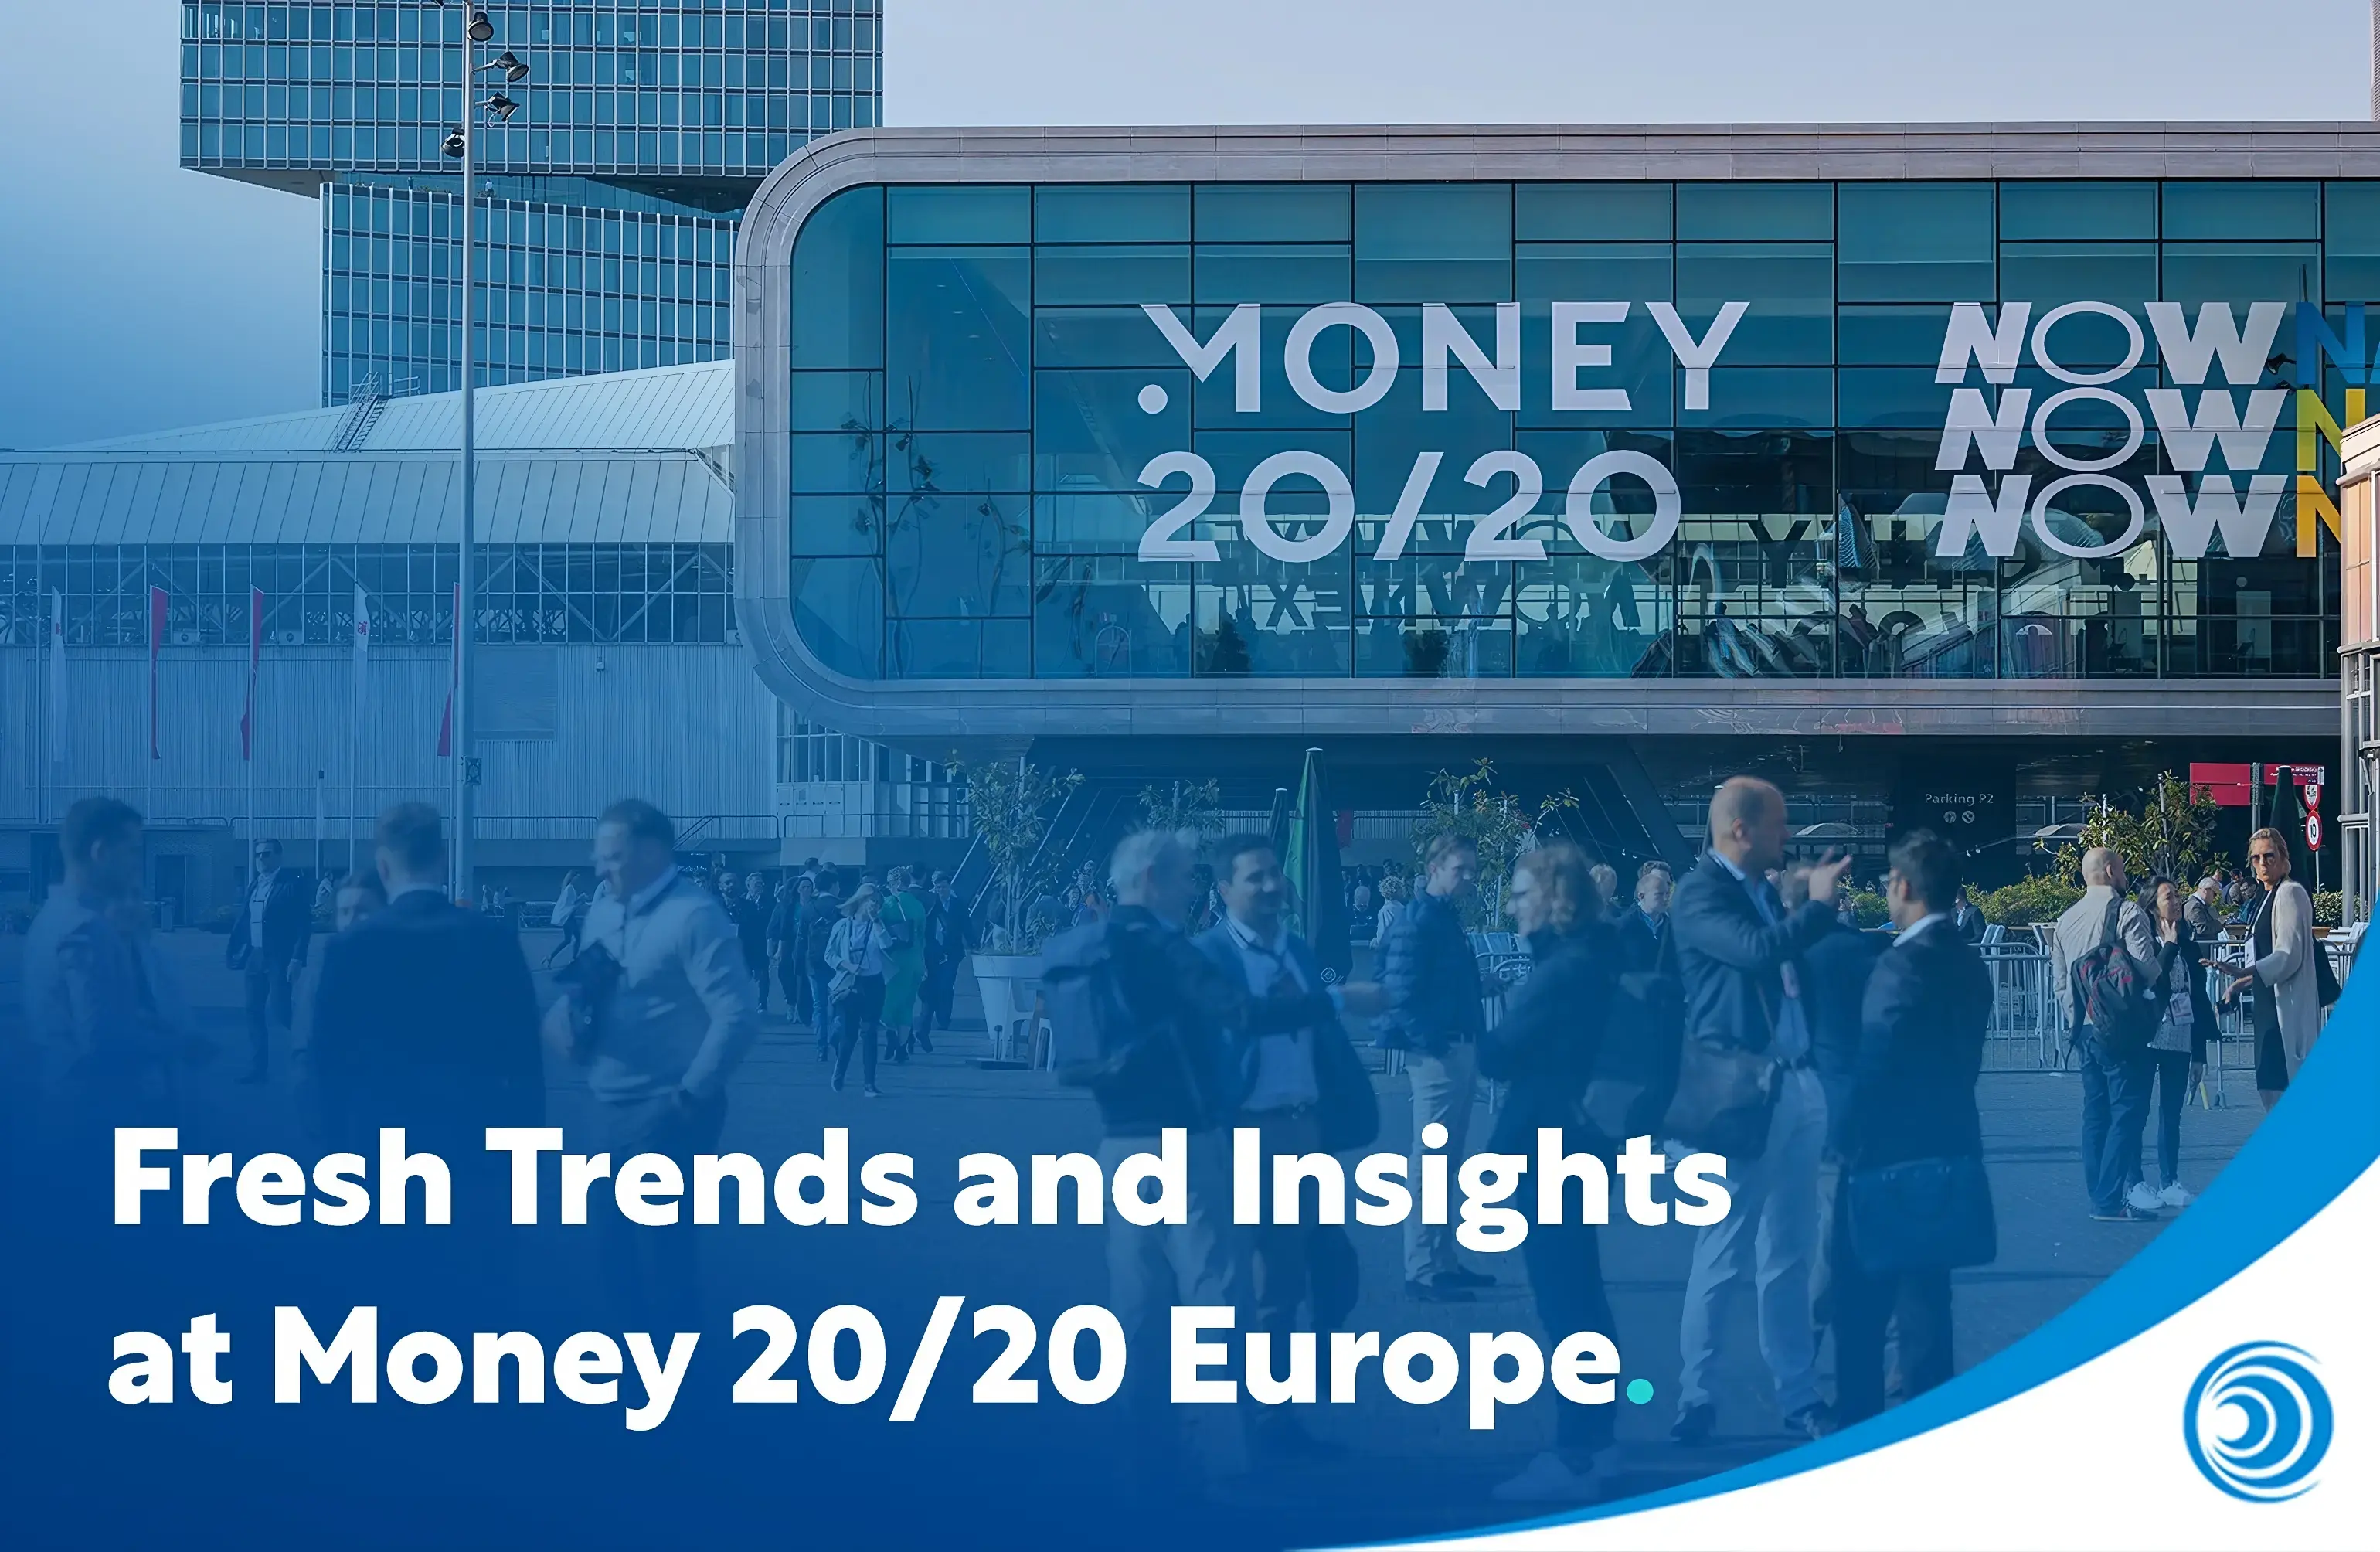 Fresh Trends and Insights at Money 20/20 Europe